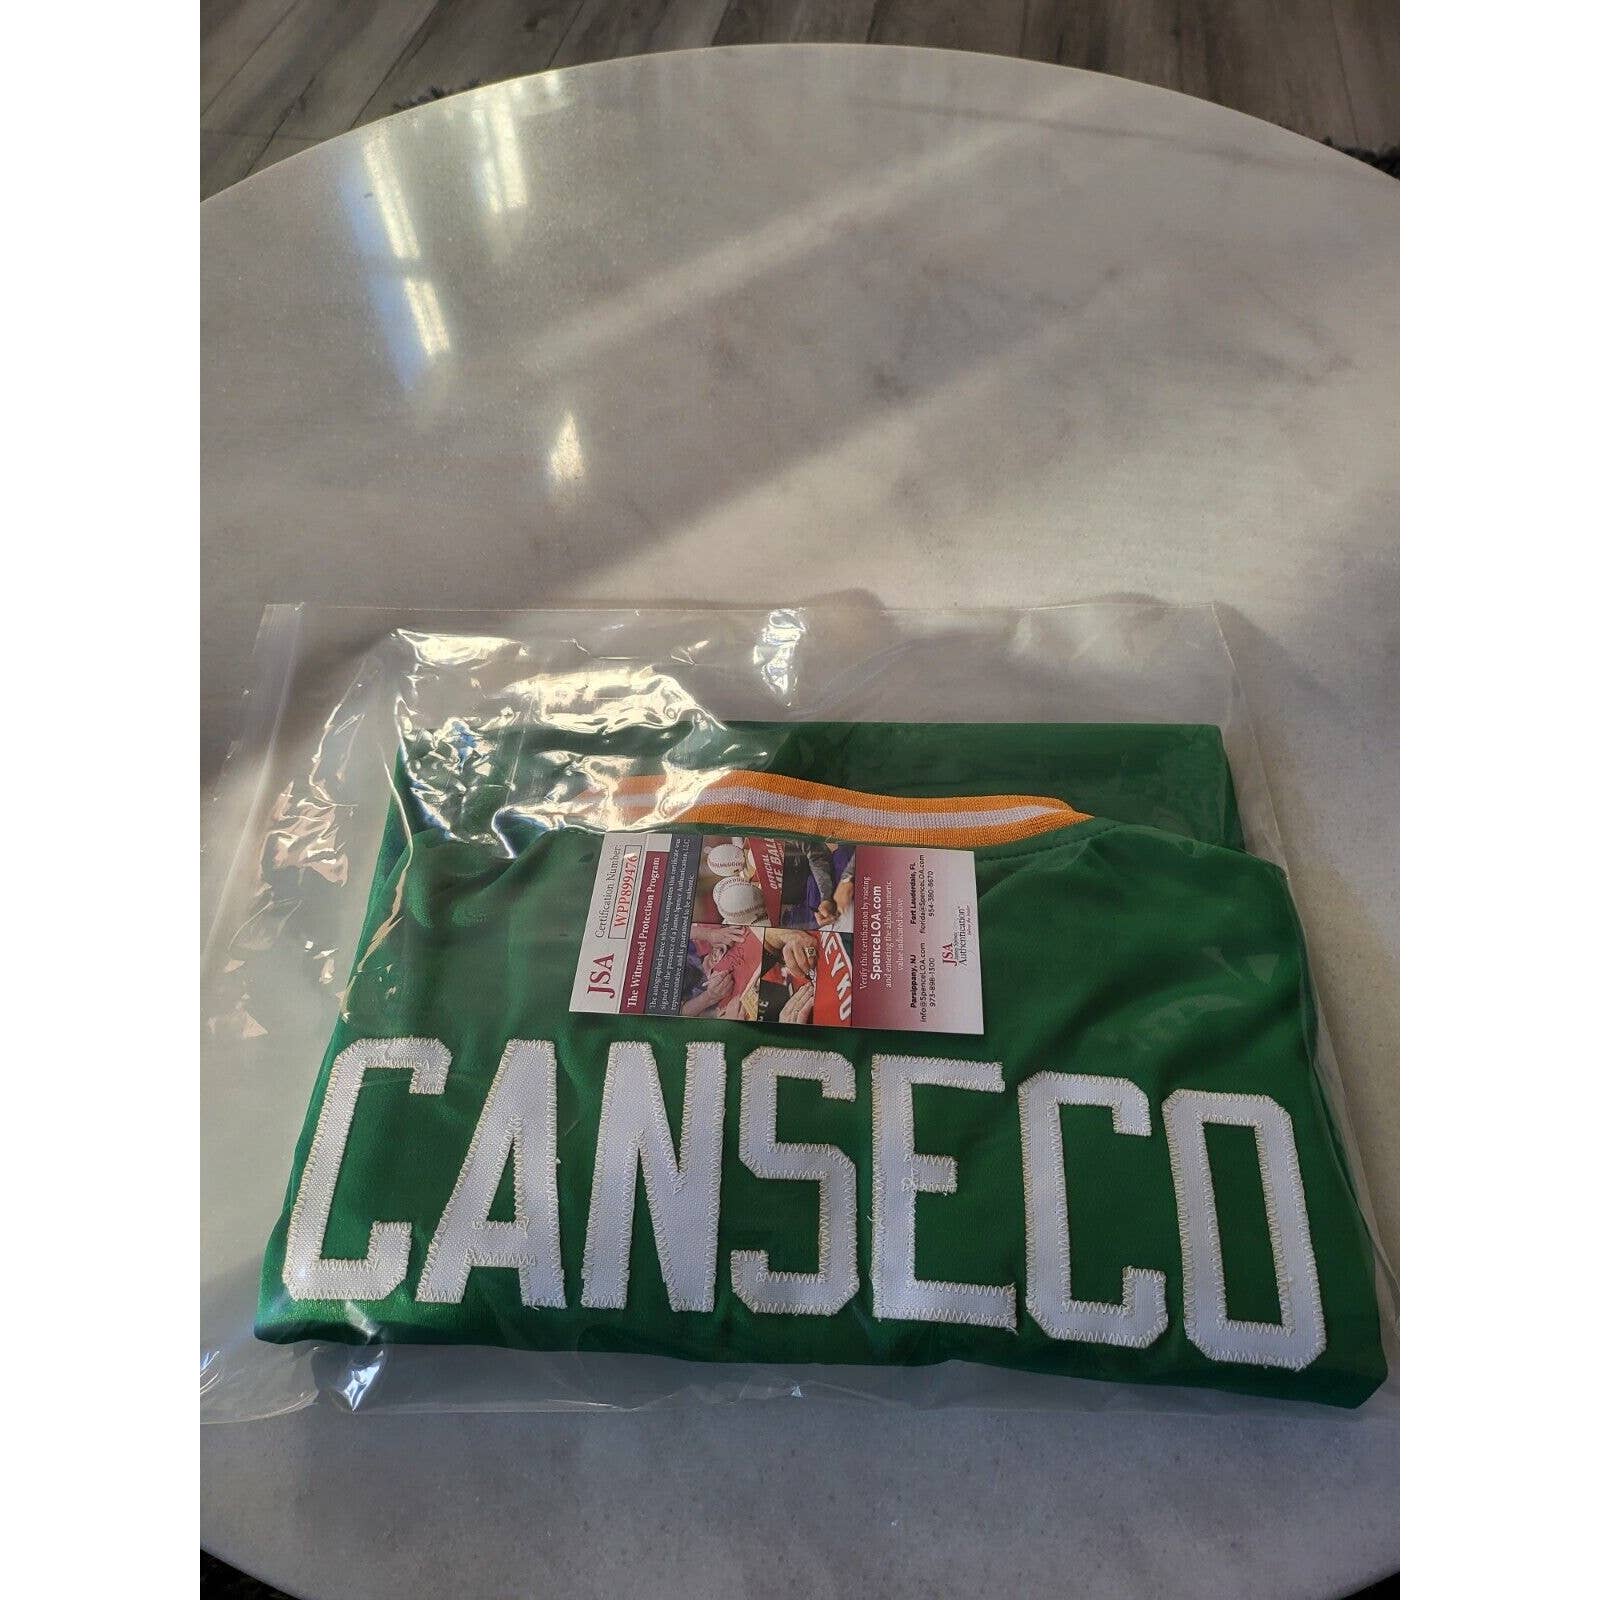 Jose Canseco Autographed/Signed Jersey JSA COA Oakland Athletics A’s Bash Bros - TreasuresEvolved